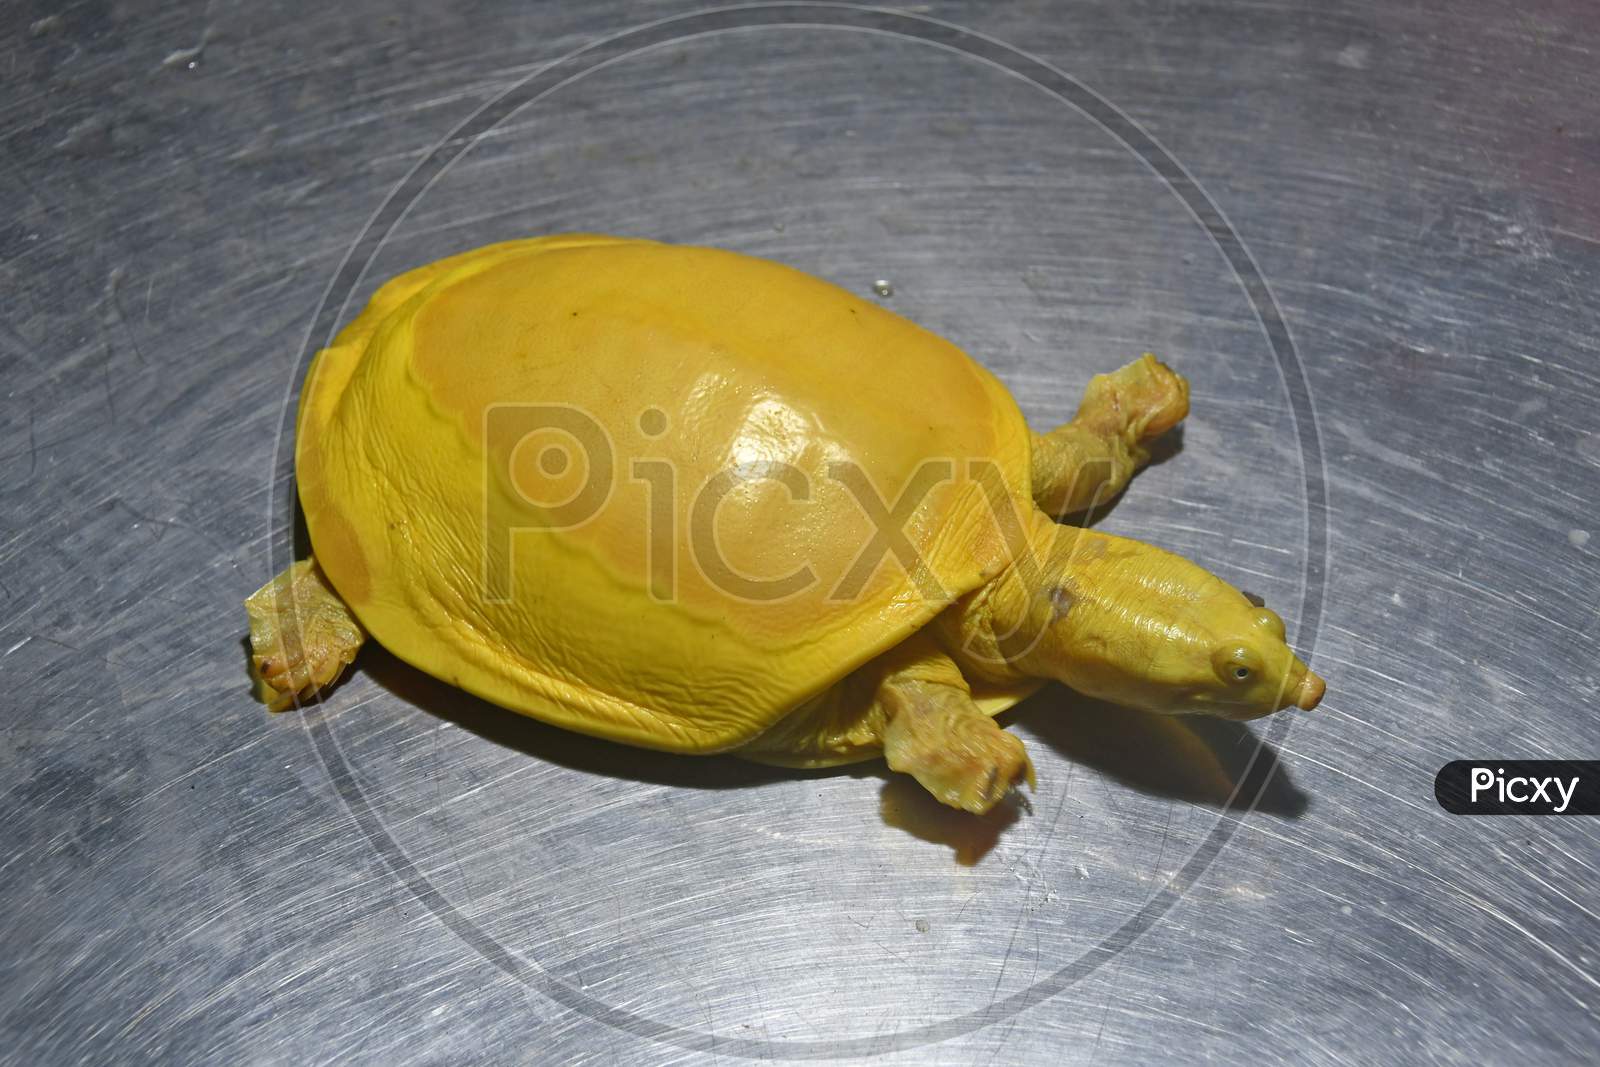 A yellow Turtle has been rescued from a pond in Kaligram village of Purba Bardhaman district.